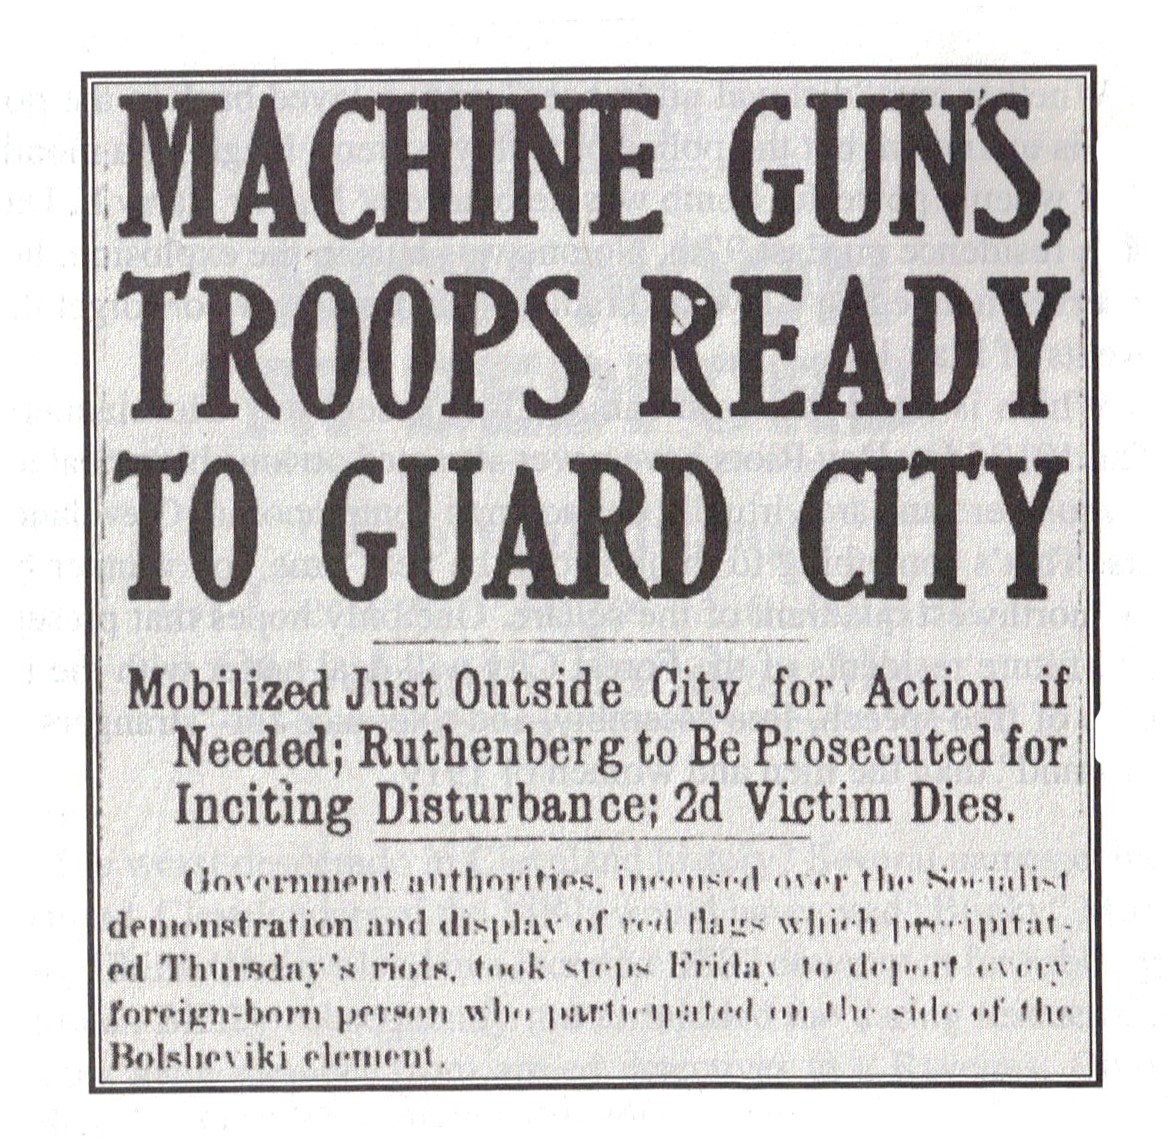 A Cleveland Leader headline after the riots